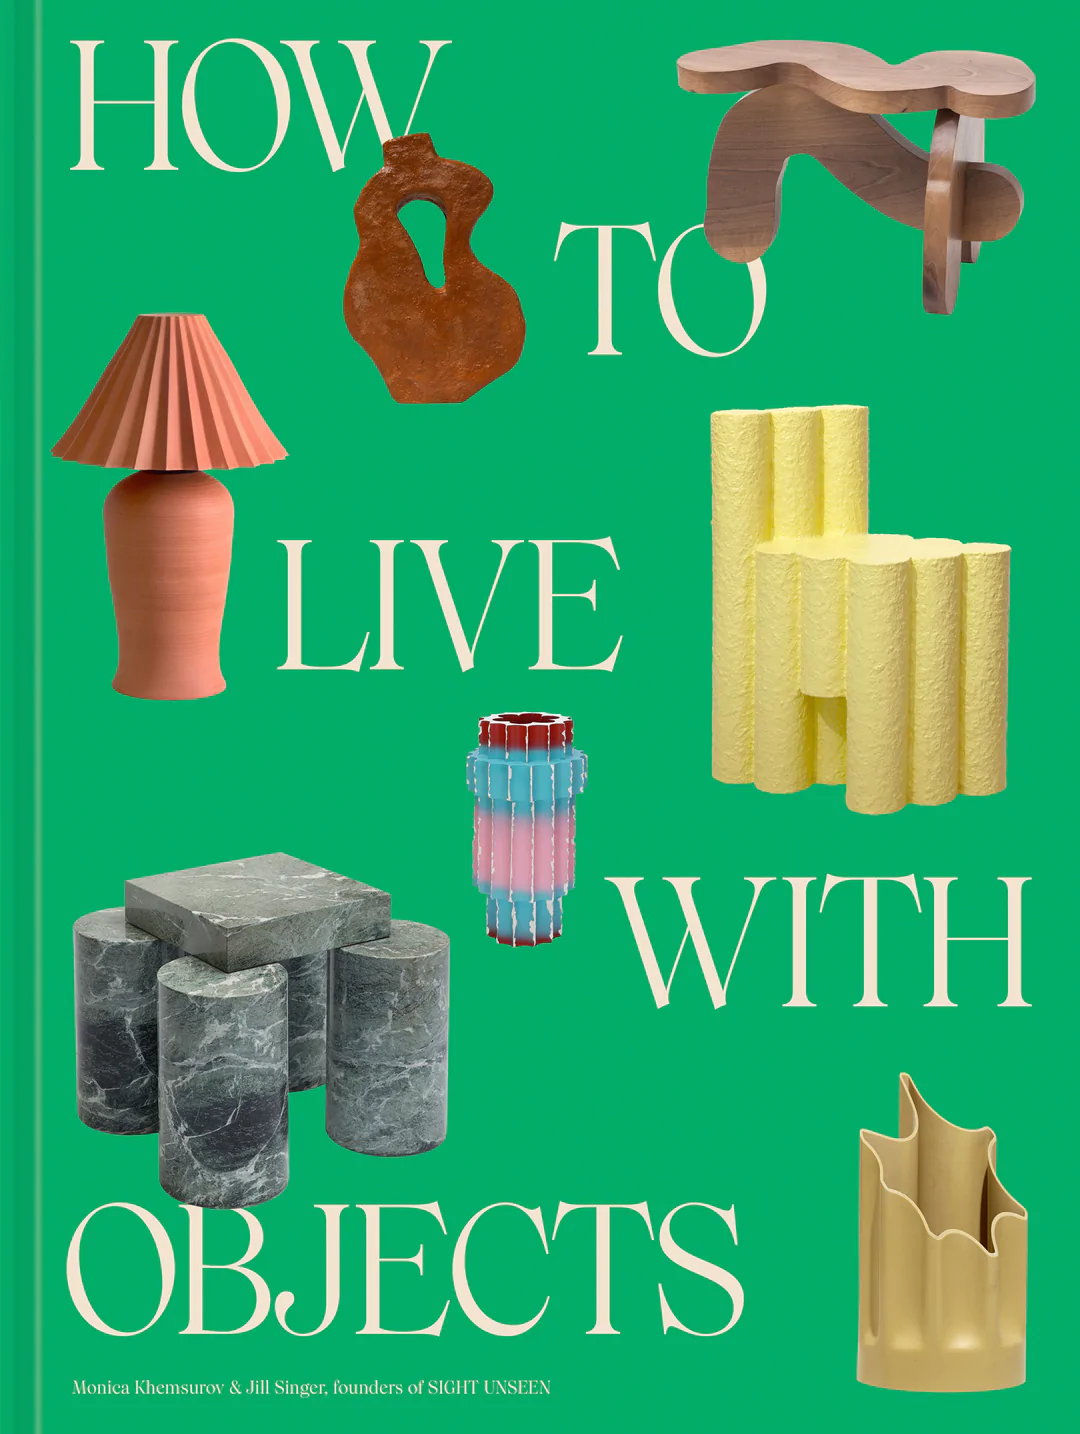 Sight Unseen book how to live with objects